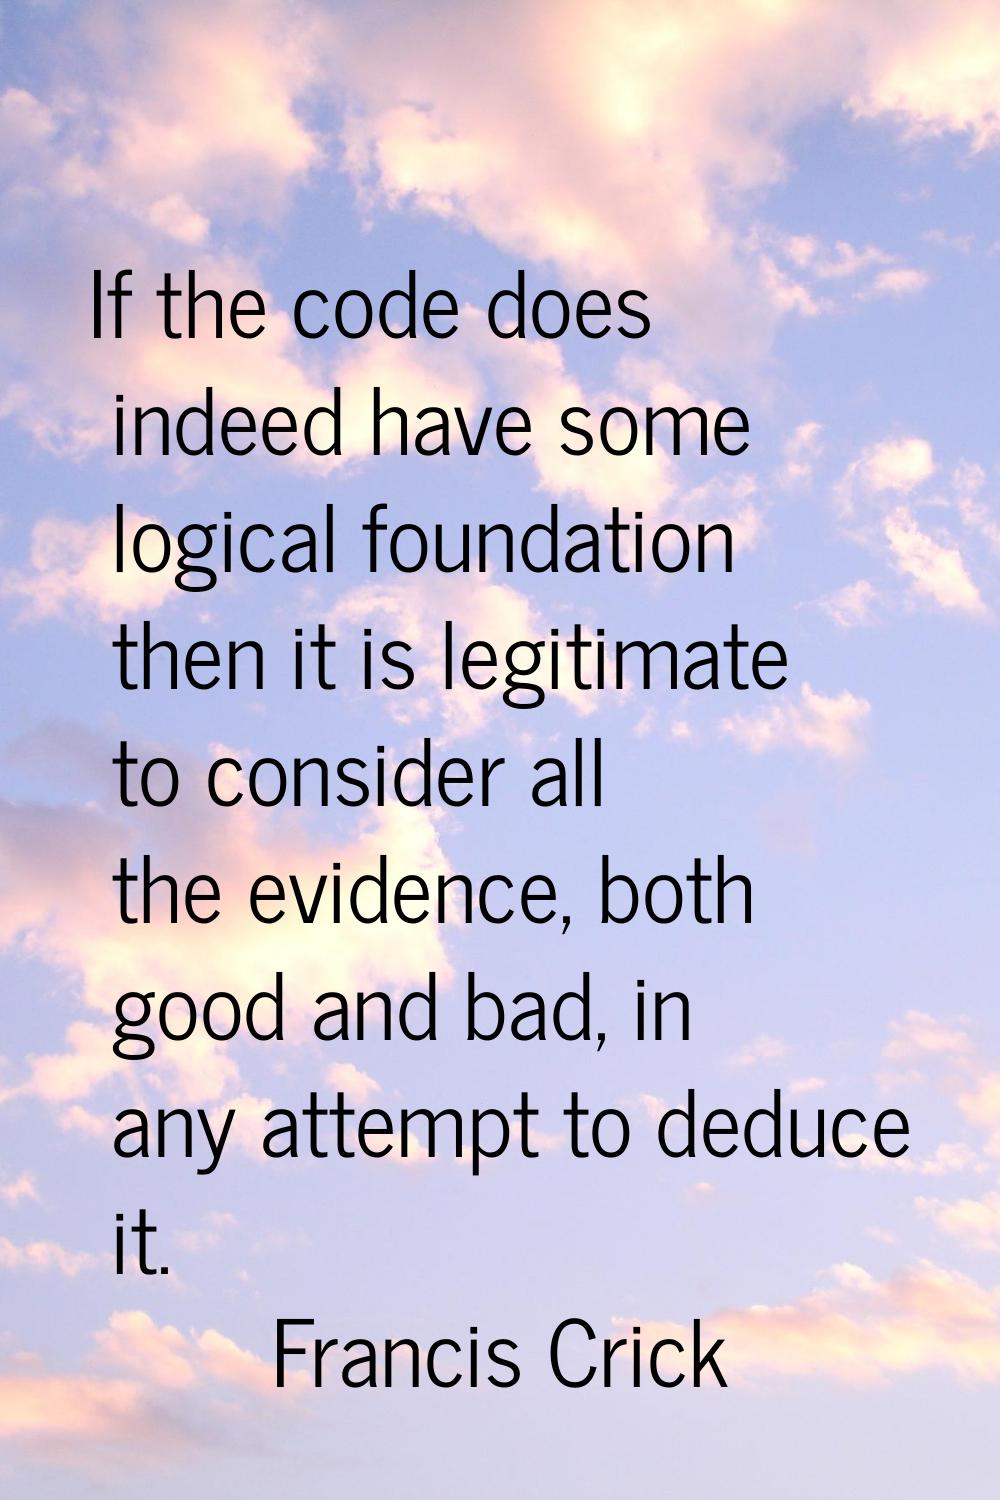 If the code does indeed have some logical foundation then it is legitimate to consider all the evid